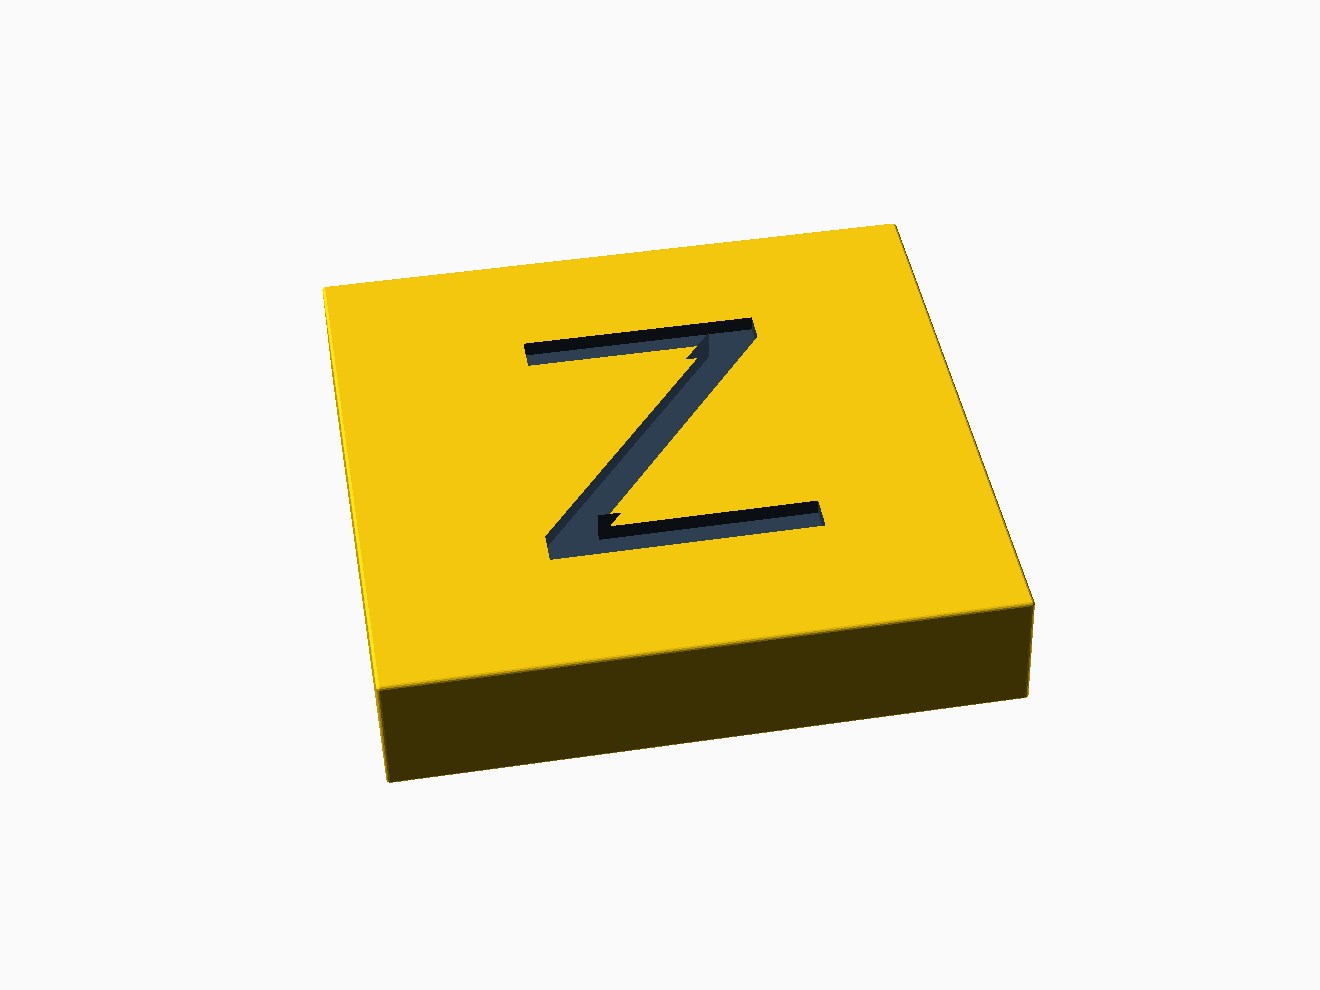 3D printable model of a LEGO 2x2 plate with engraved letter.